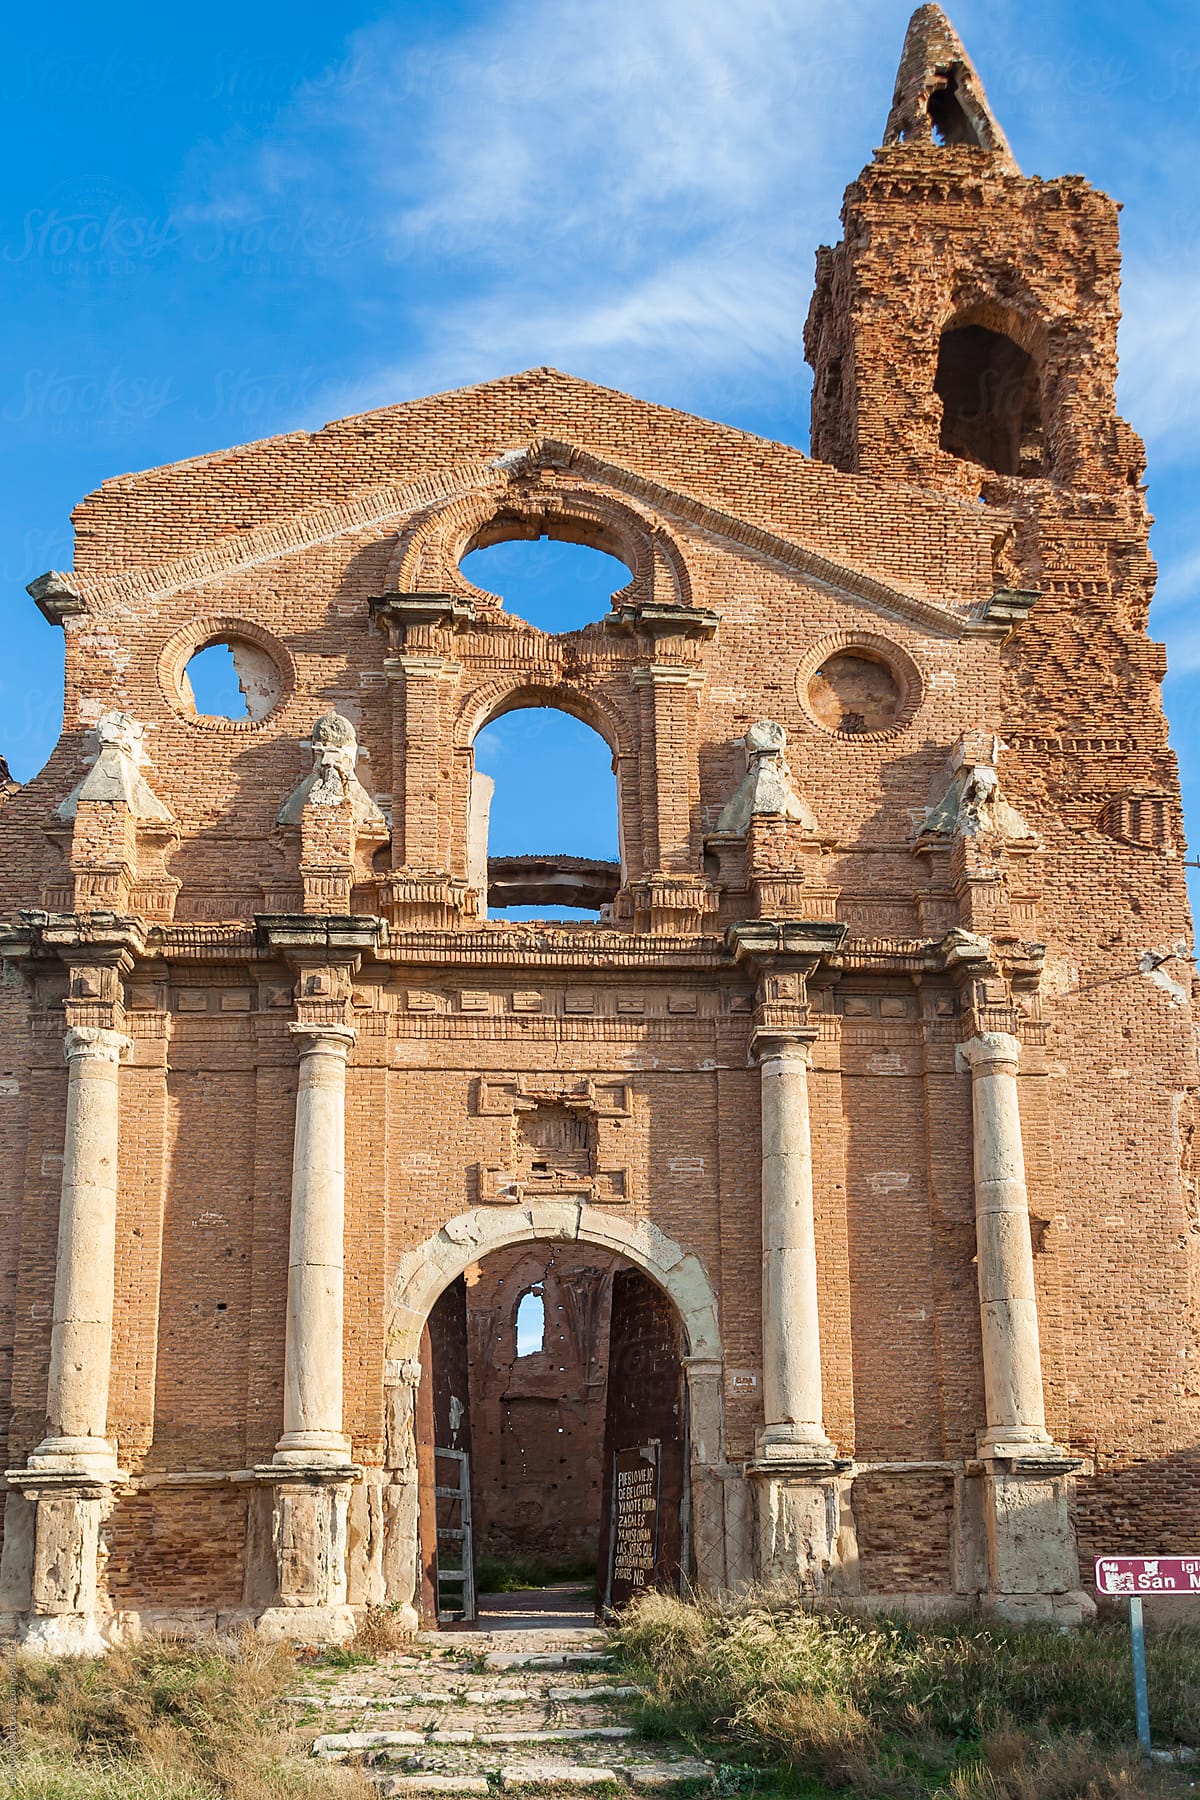 Facade and bell tower of church destroyed by artillery fire